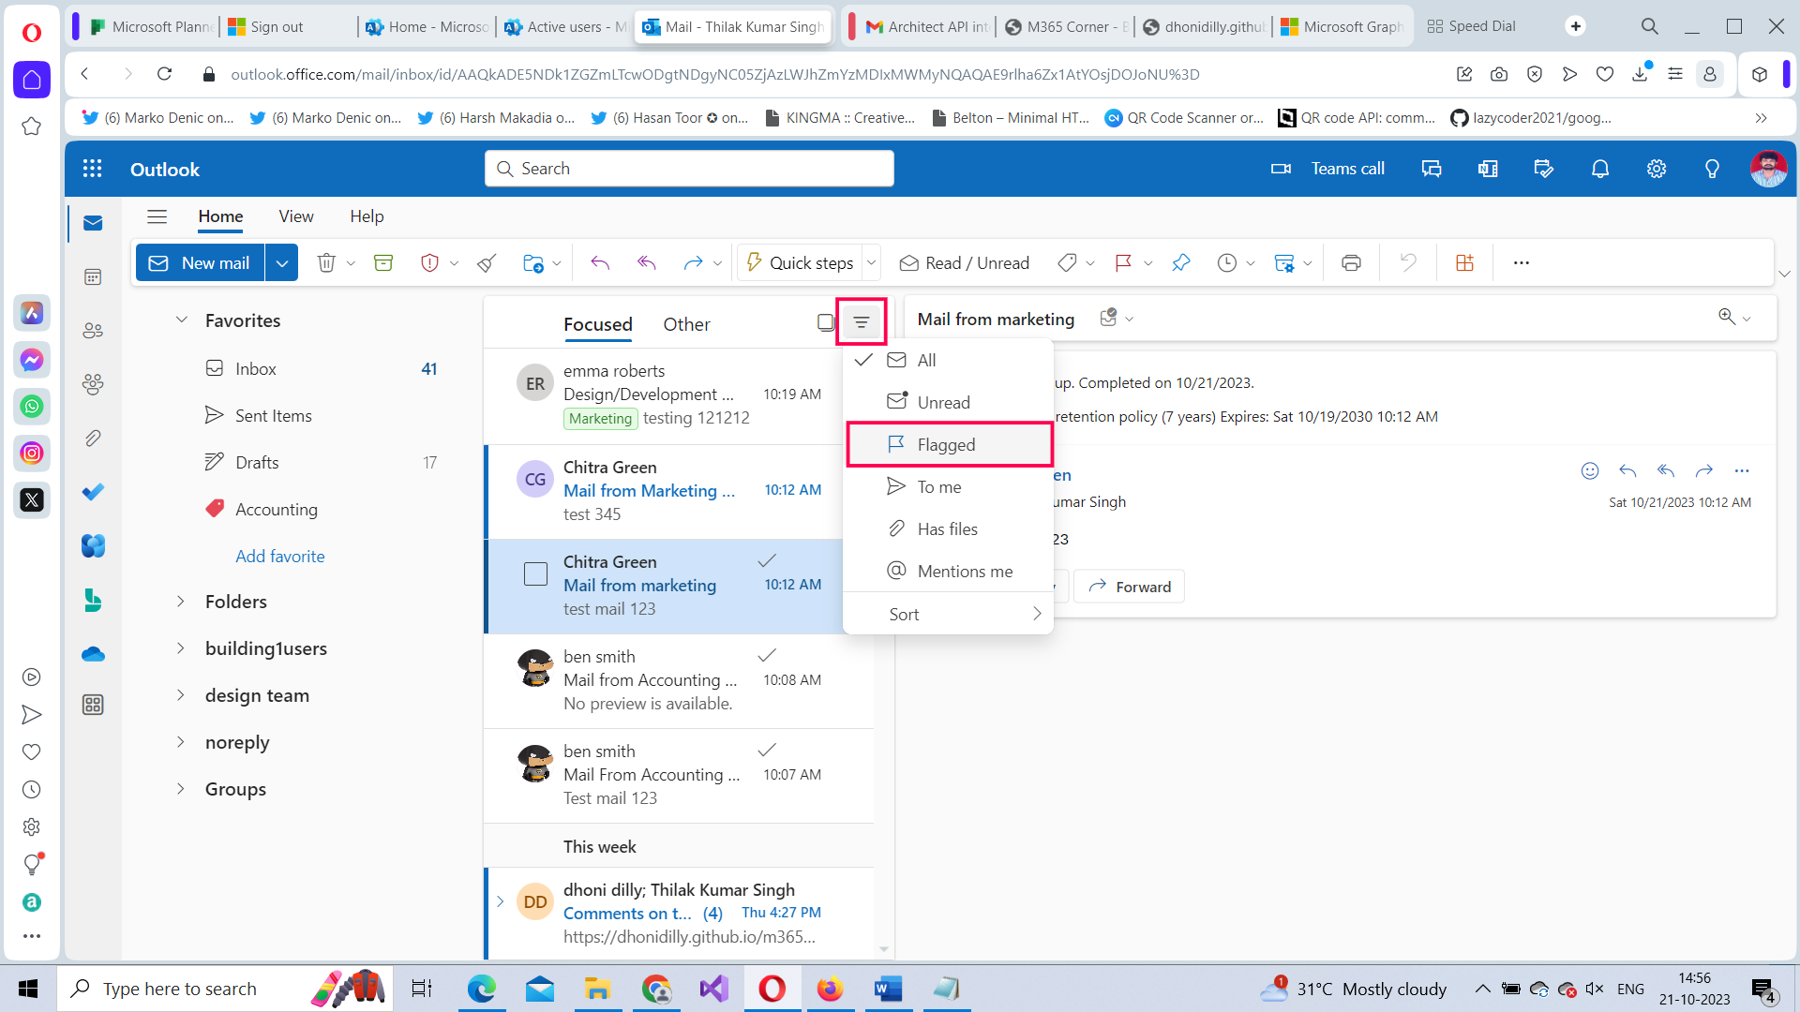 This screenshot shows how you can filter your inbox and look for only flagged mails in Microsoft 365 Outlook on the web. 